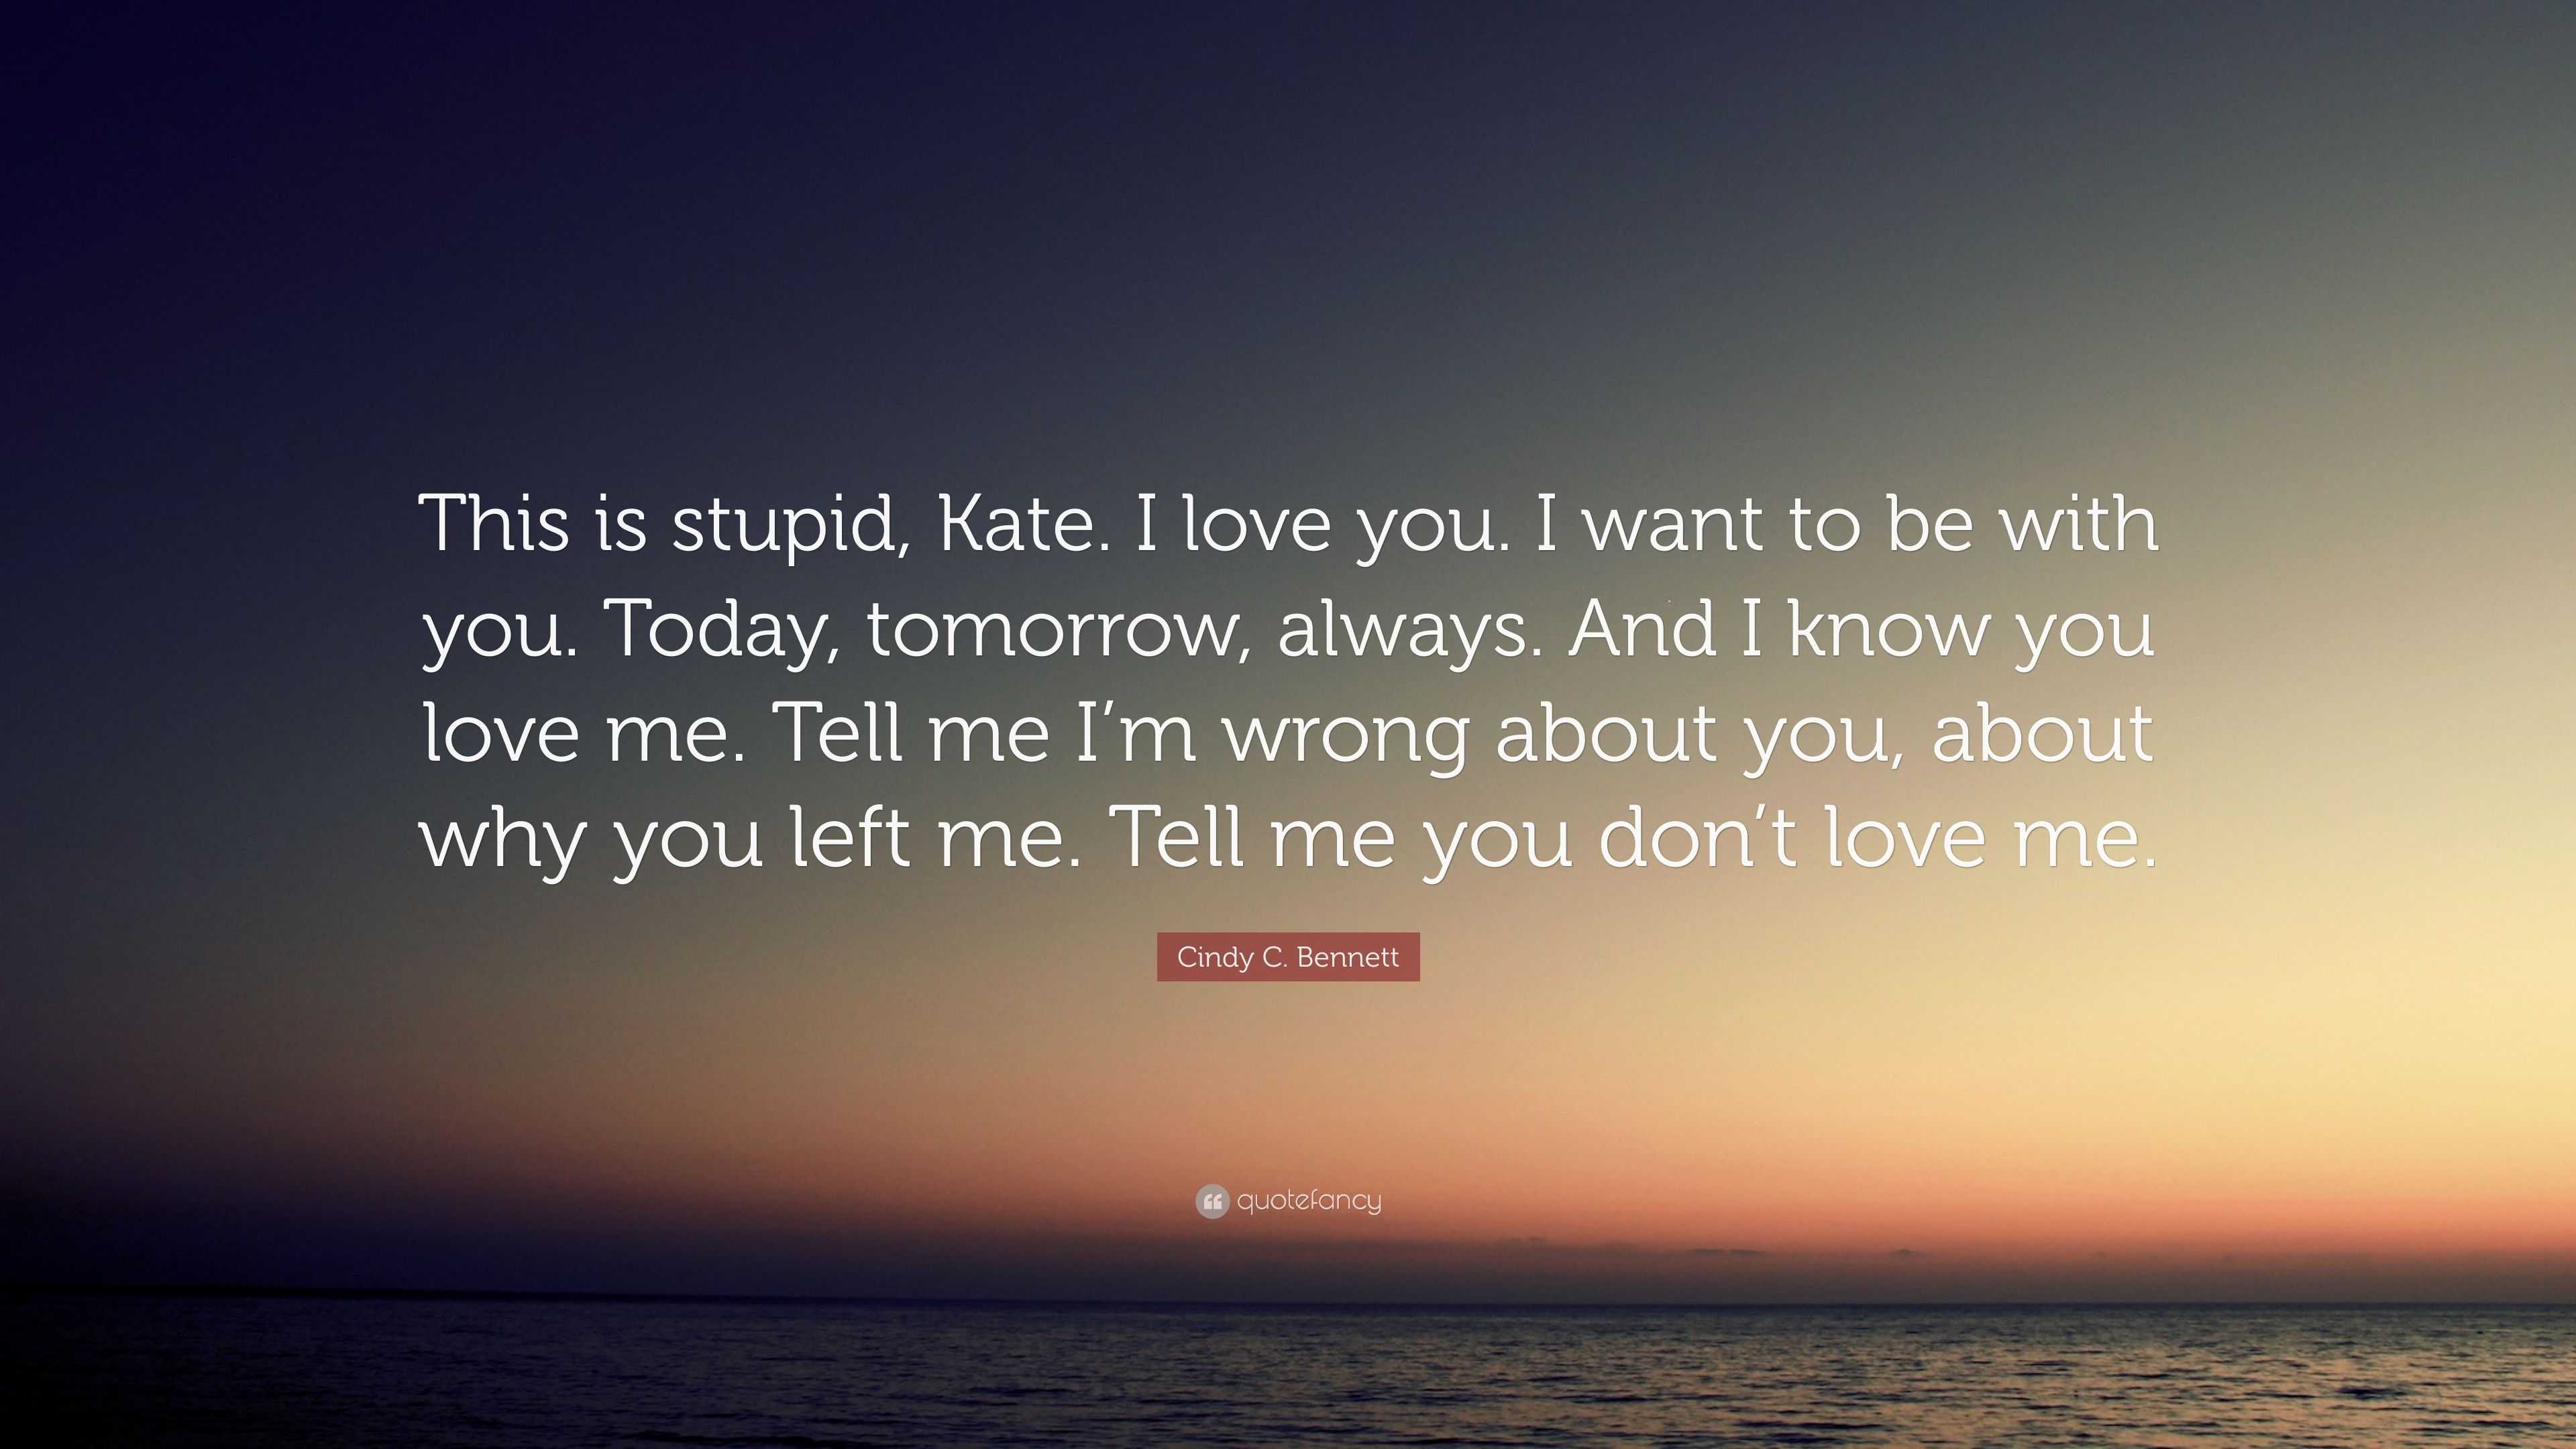 Cindy C Bennett Quote “This is stupid Kate I love you